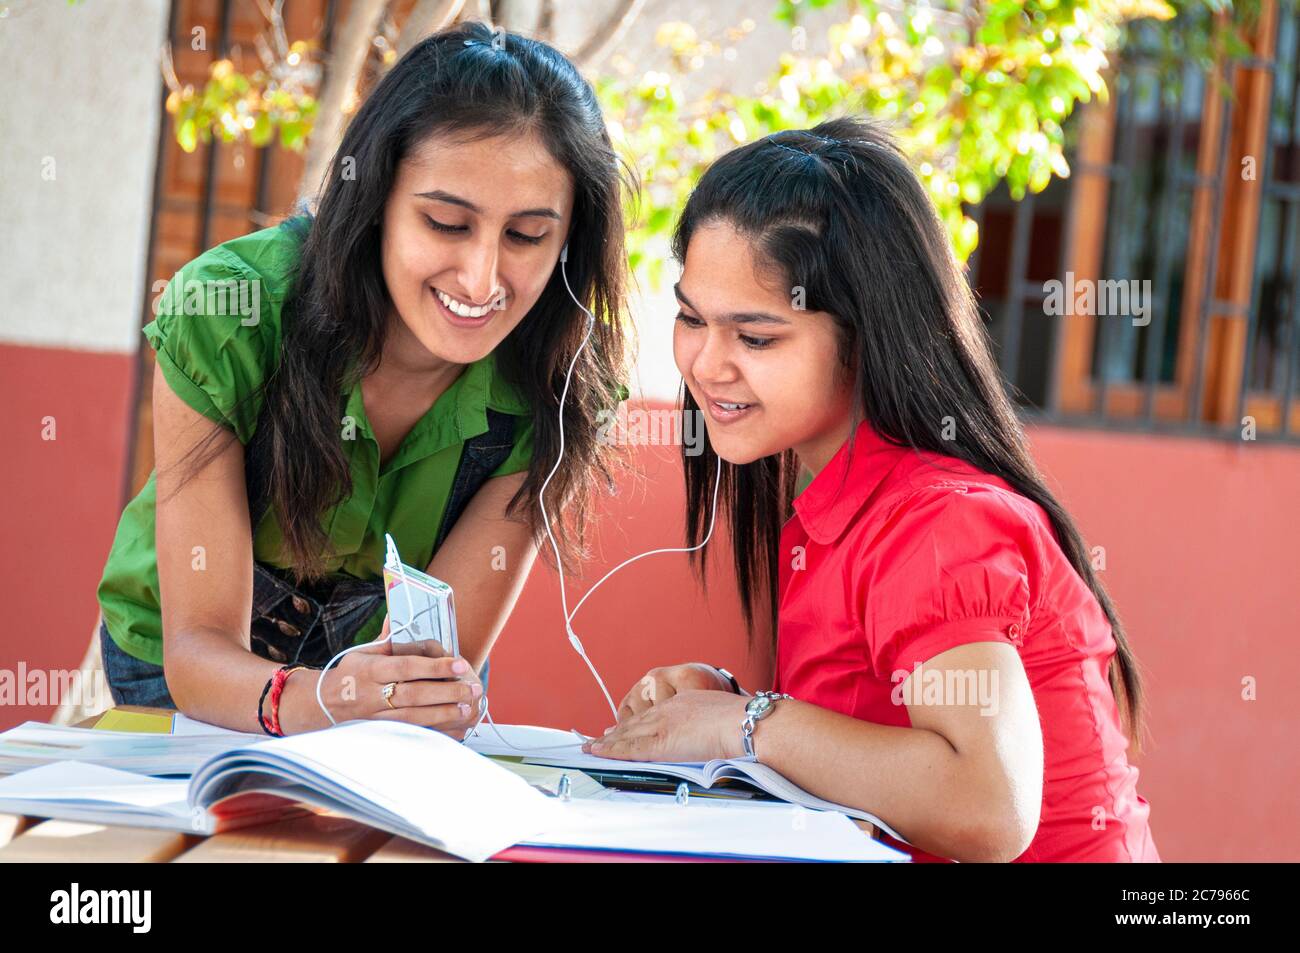 School teenage girl asian students 15-17 years sharing earphones with their Mp4 iPod player during studies outside in sunny school playground campus Stock Photo